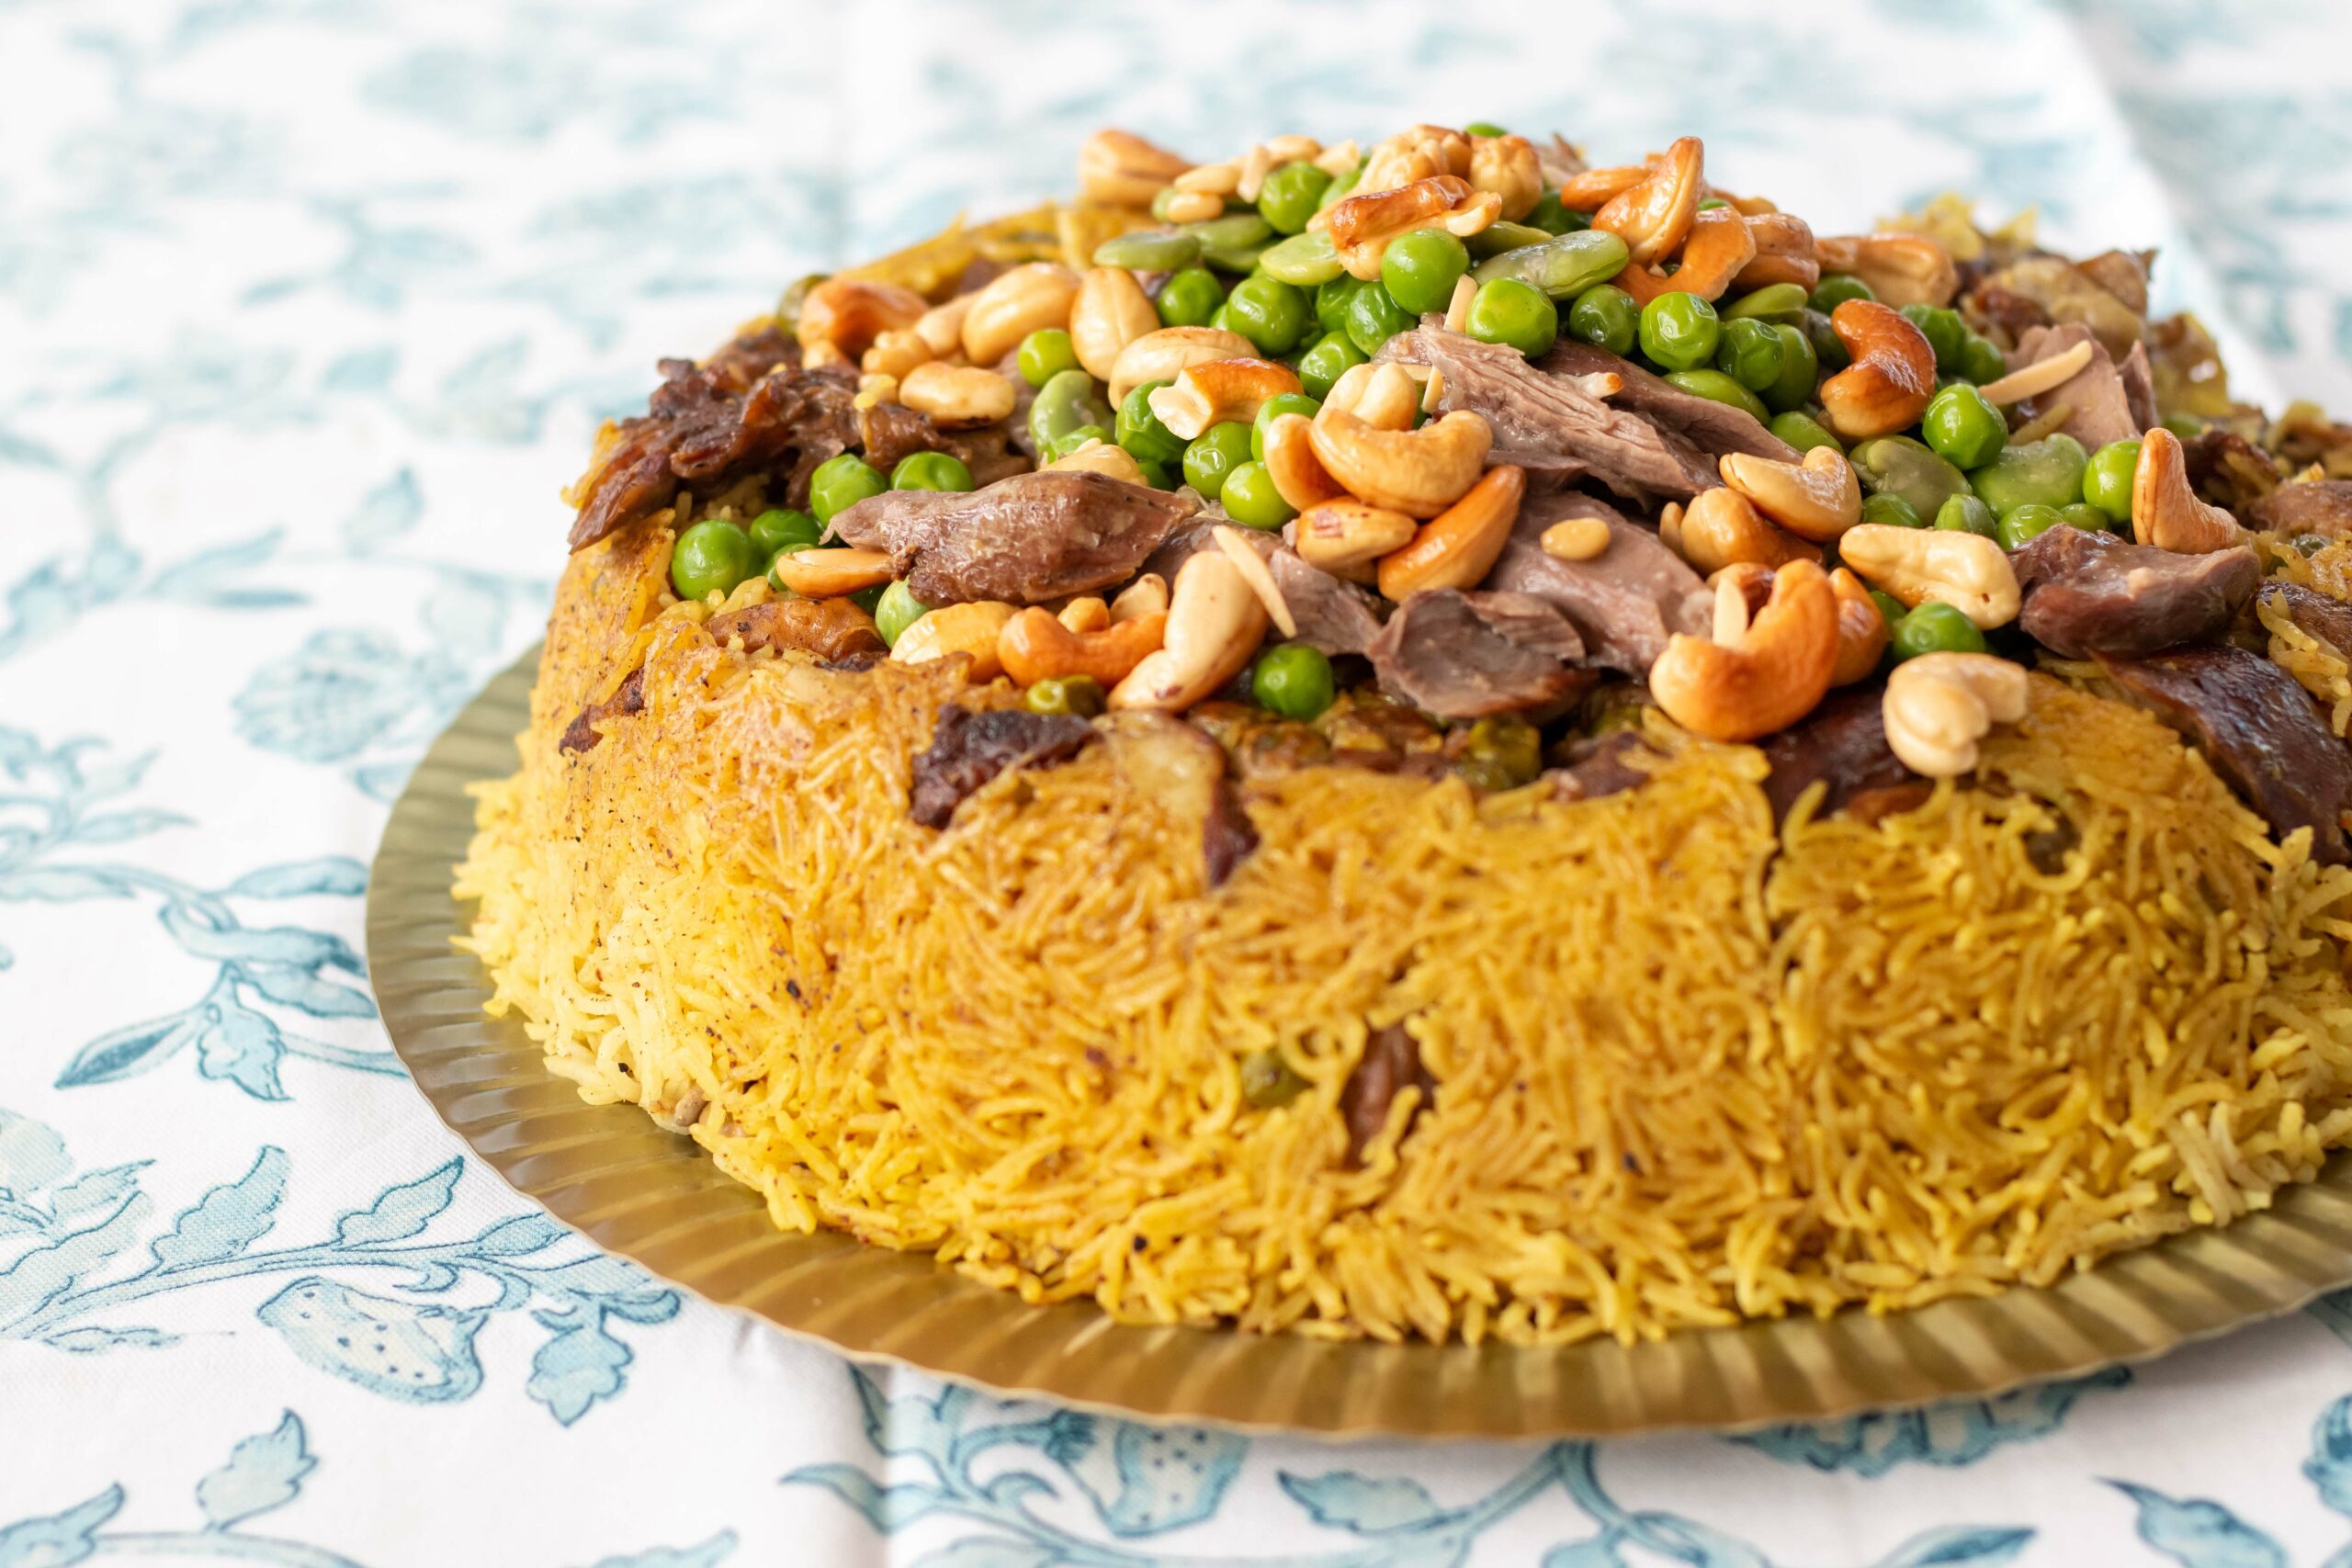 Rice casserole topped with fava beans, meat, and cashews